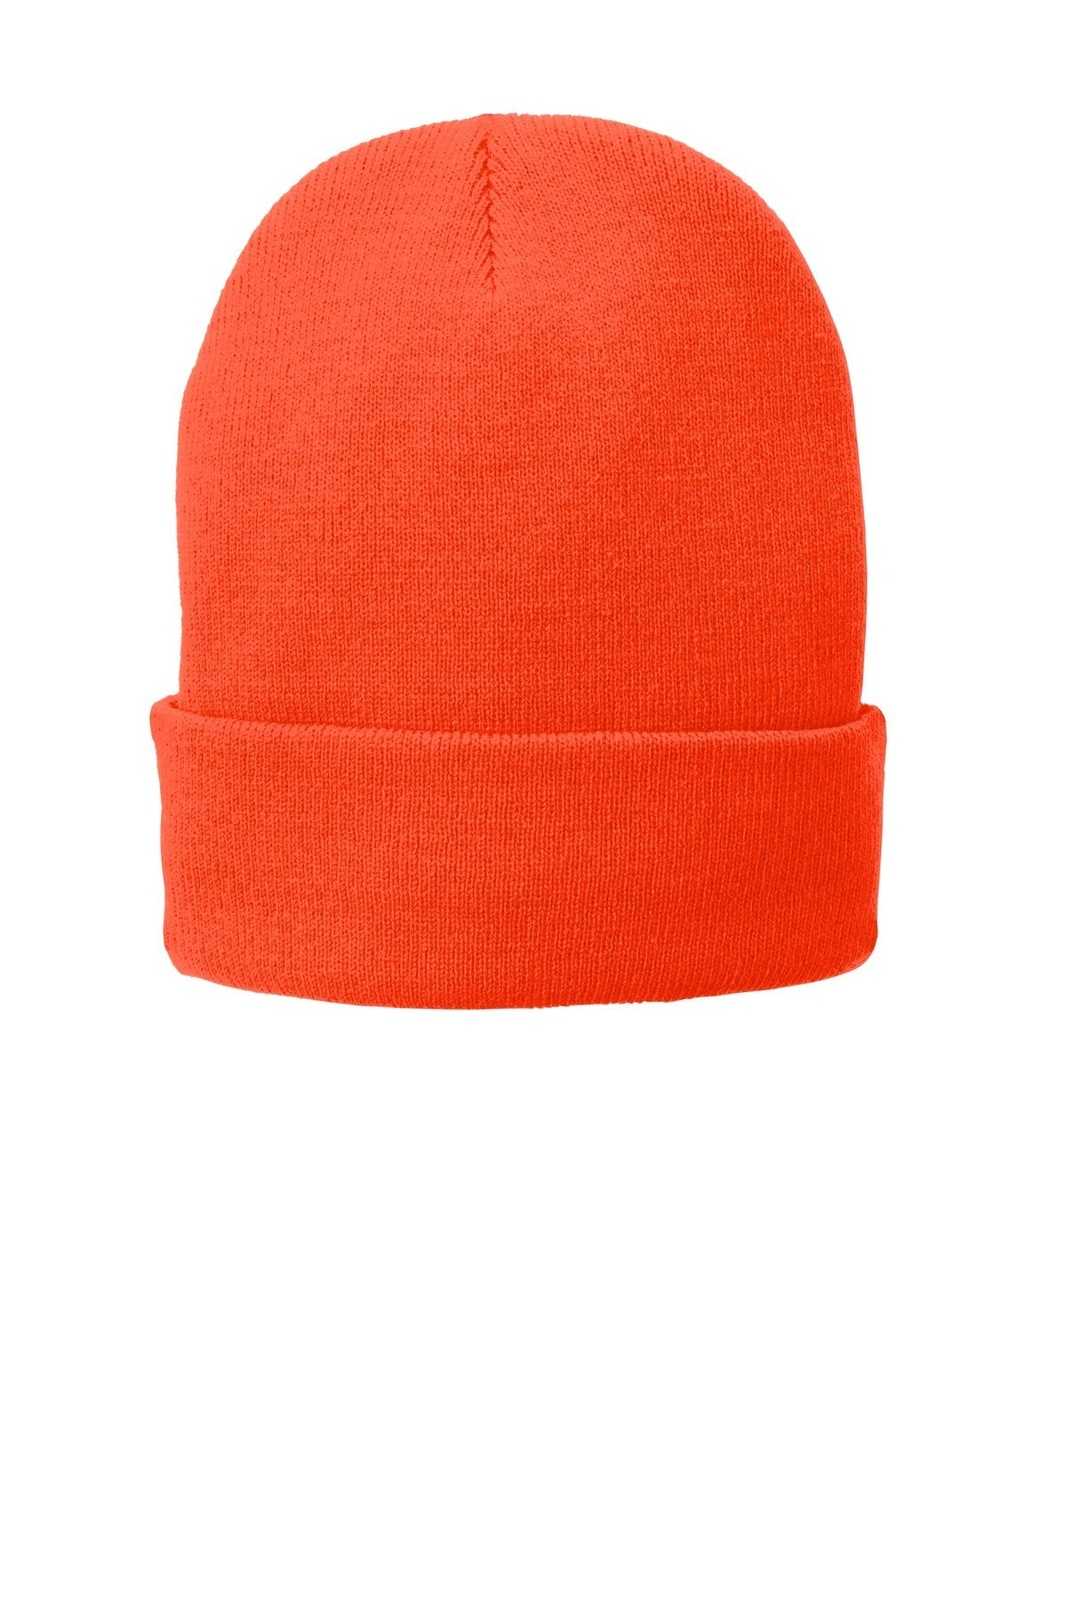 Port & Company CP90L Fleece-Lined Knit Cap with Cuff - Athletic Orange - HIT a Double - 1